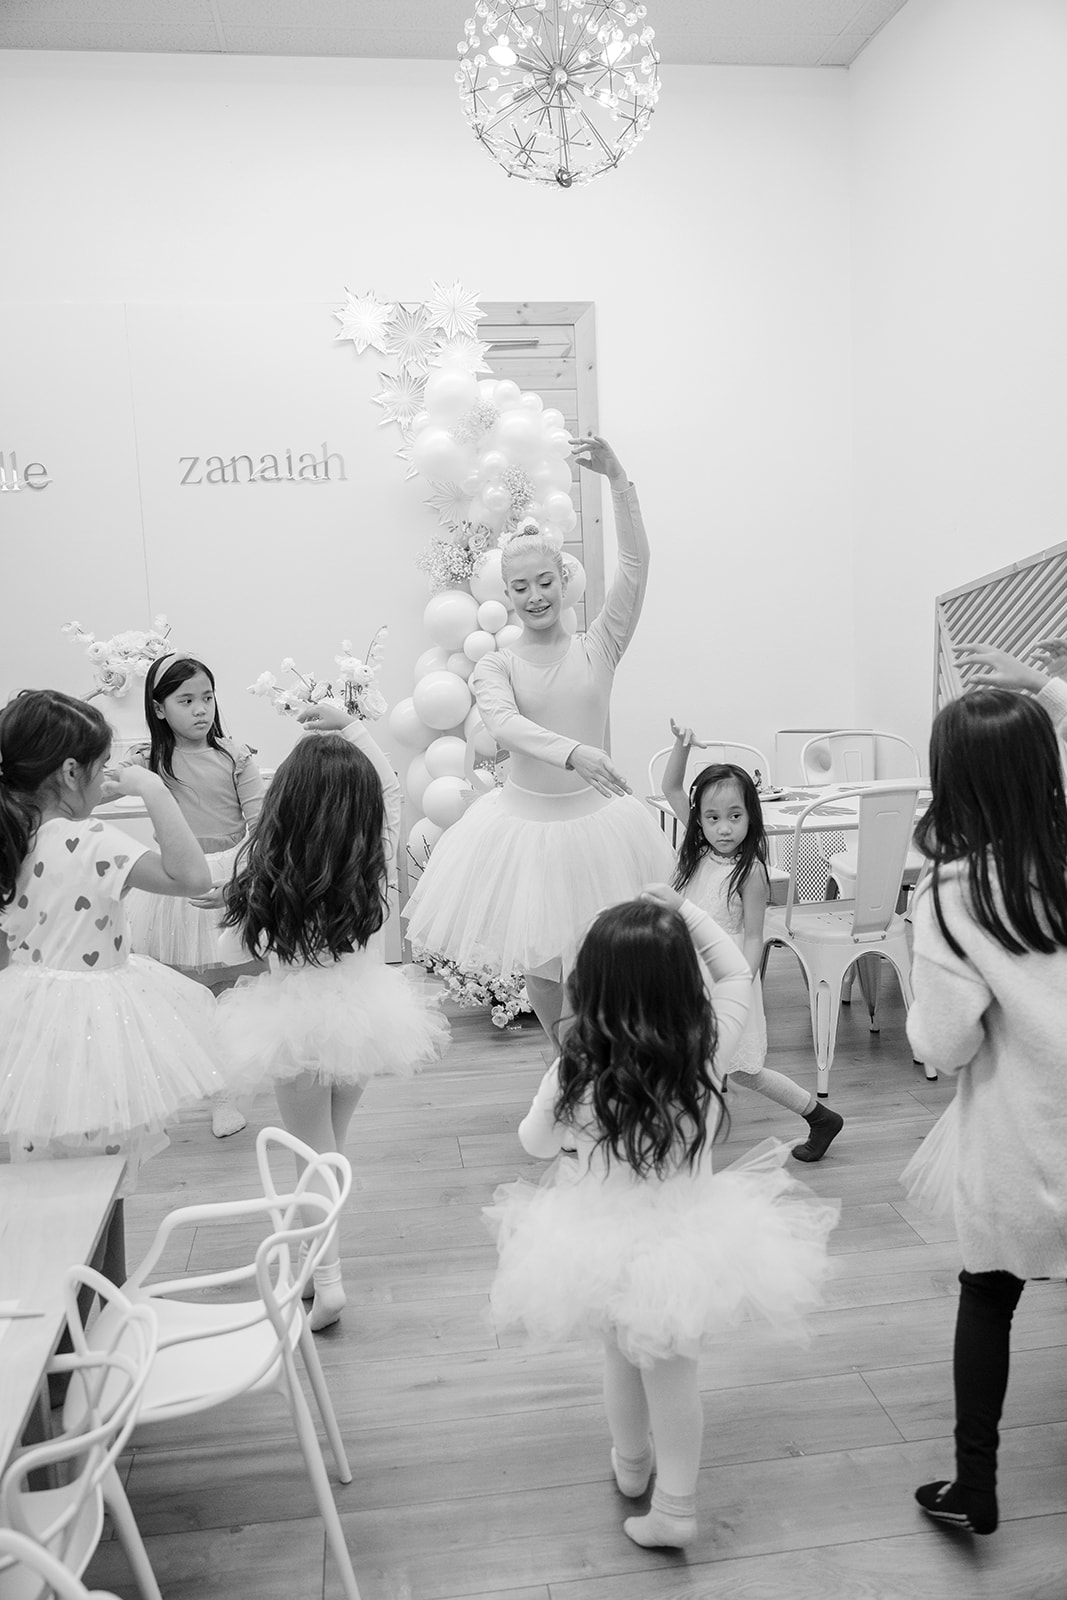 Ballet instructor teaching ballet to birthday girls and party guests.